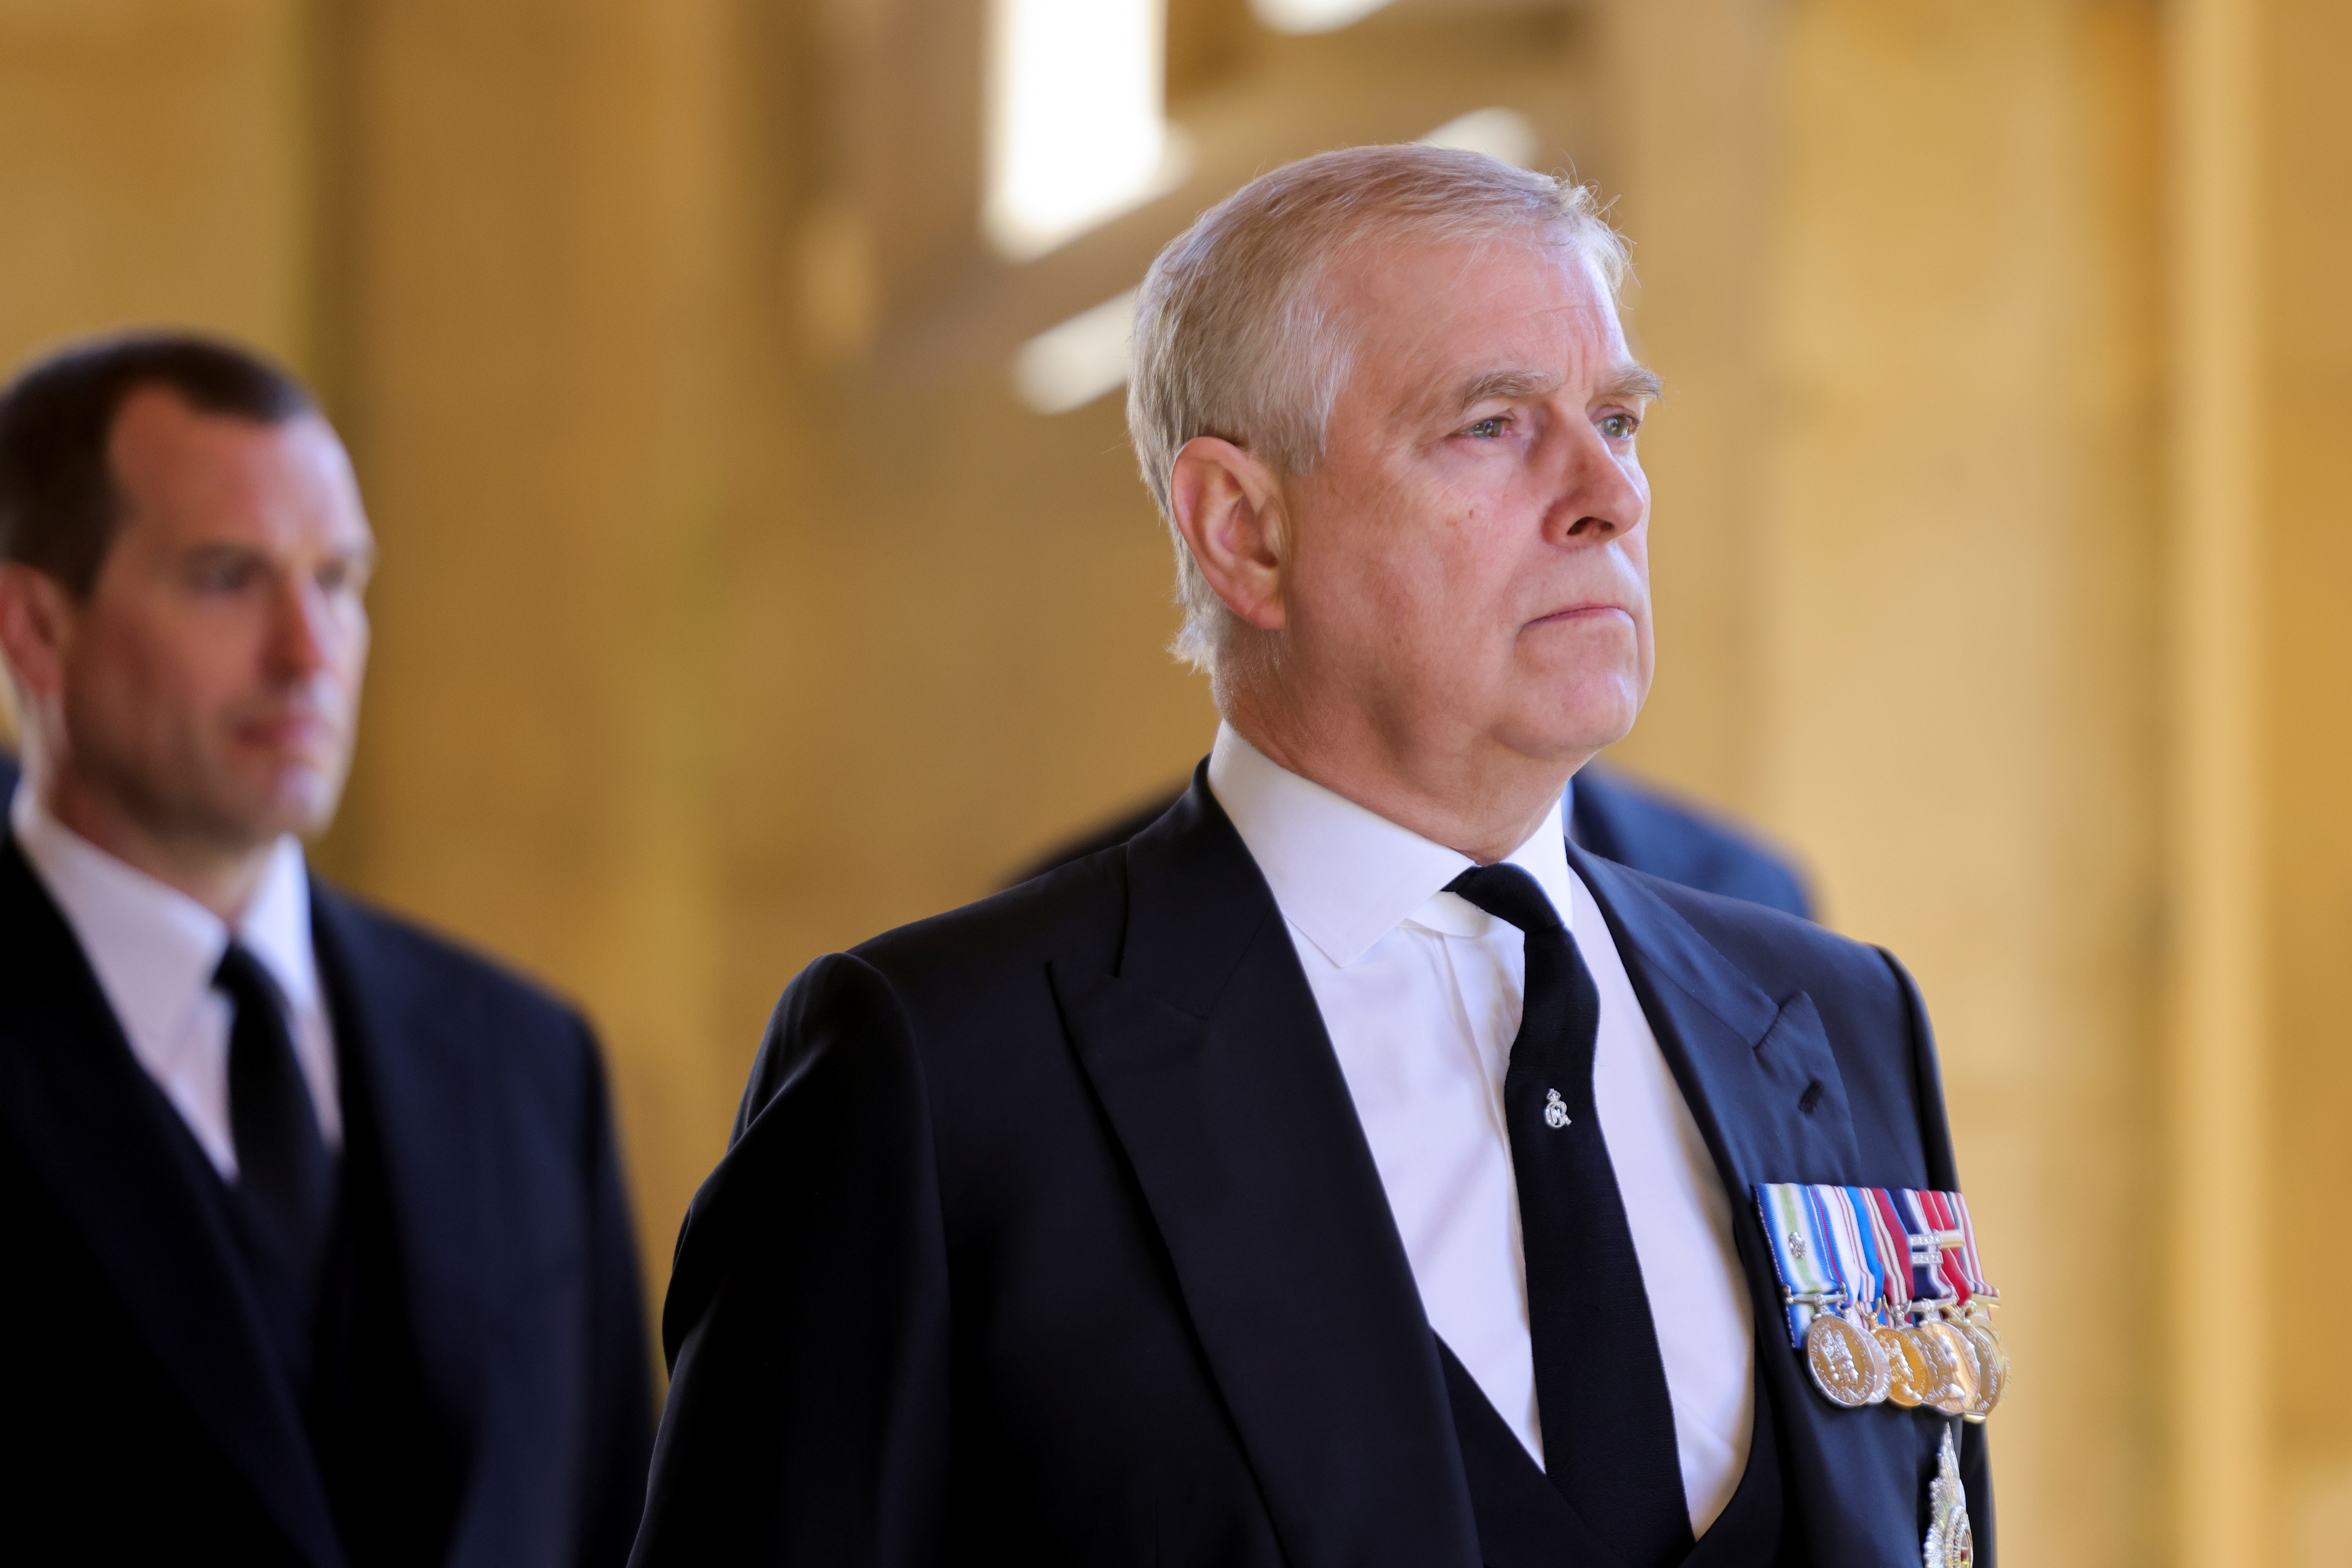 Britain's Britain's Prince Andrew, Duke of York, looks on during the funeral of Britain's Prince Philip, husband of Queen Elizabeth, who died at the age of 99, on the grounds of Windsor Castle in Windsor, Britain, April 17, 2021. Chris Jackson/Pool via REUTERS